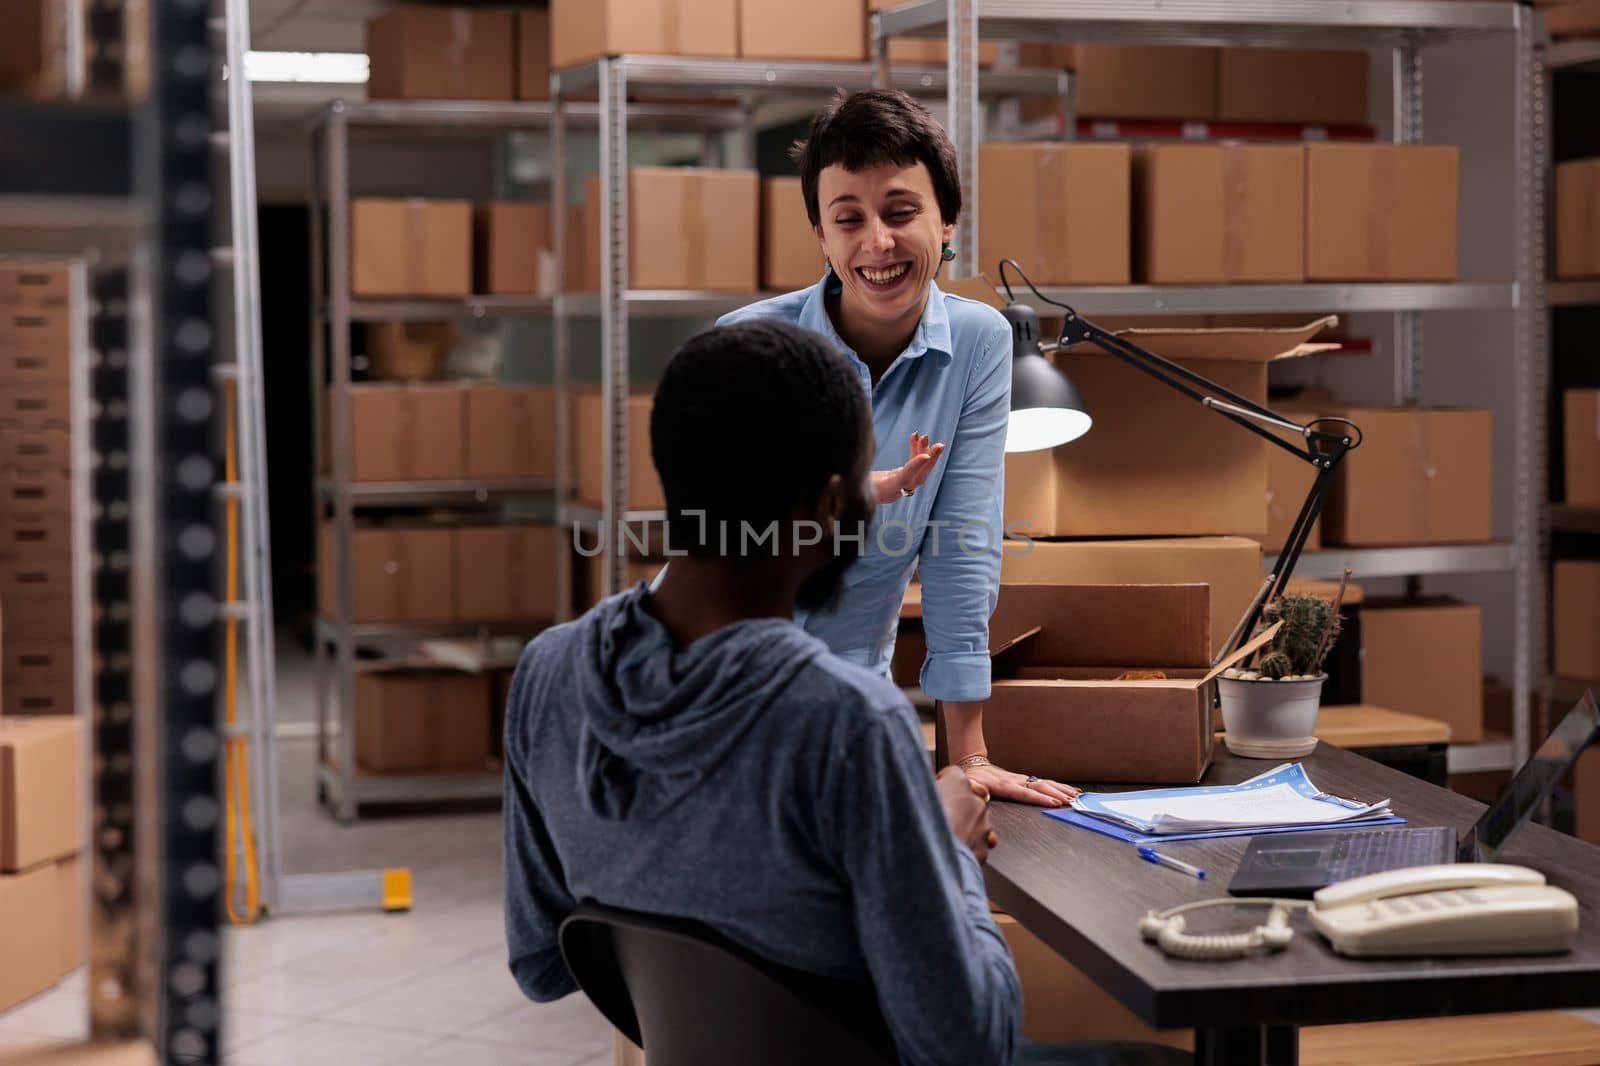 Storehouse workers having fun at job while preparing customers packages putting order in carton box by DCStudio